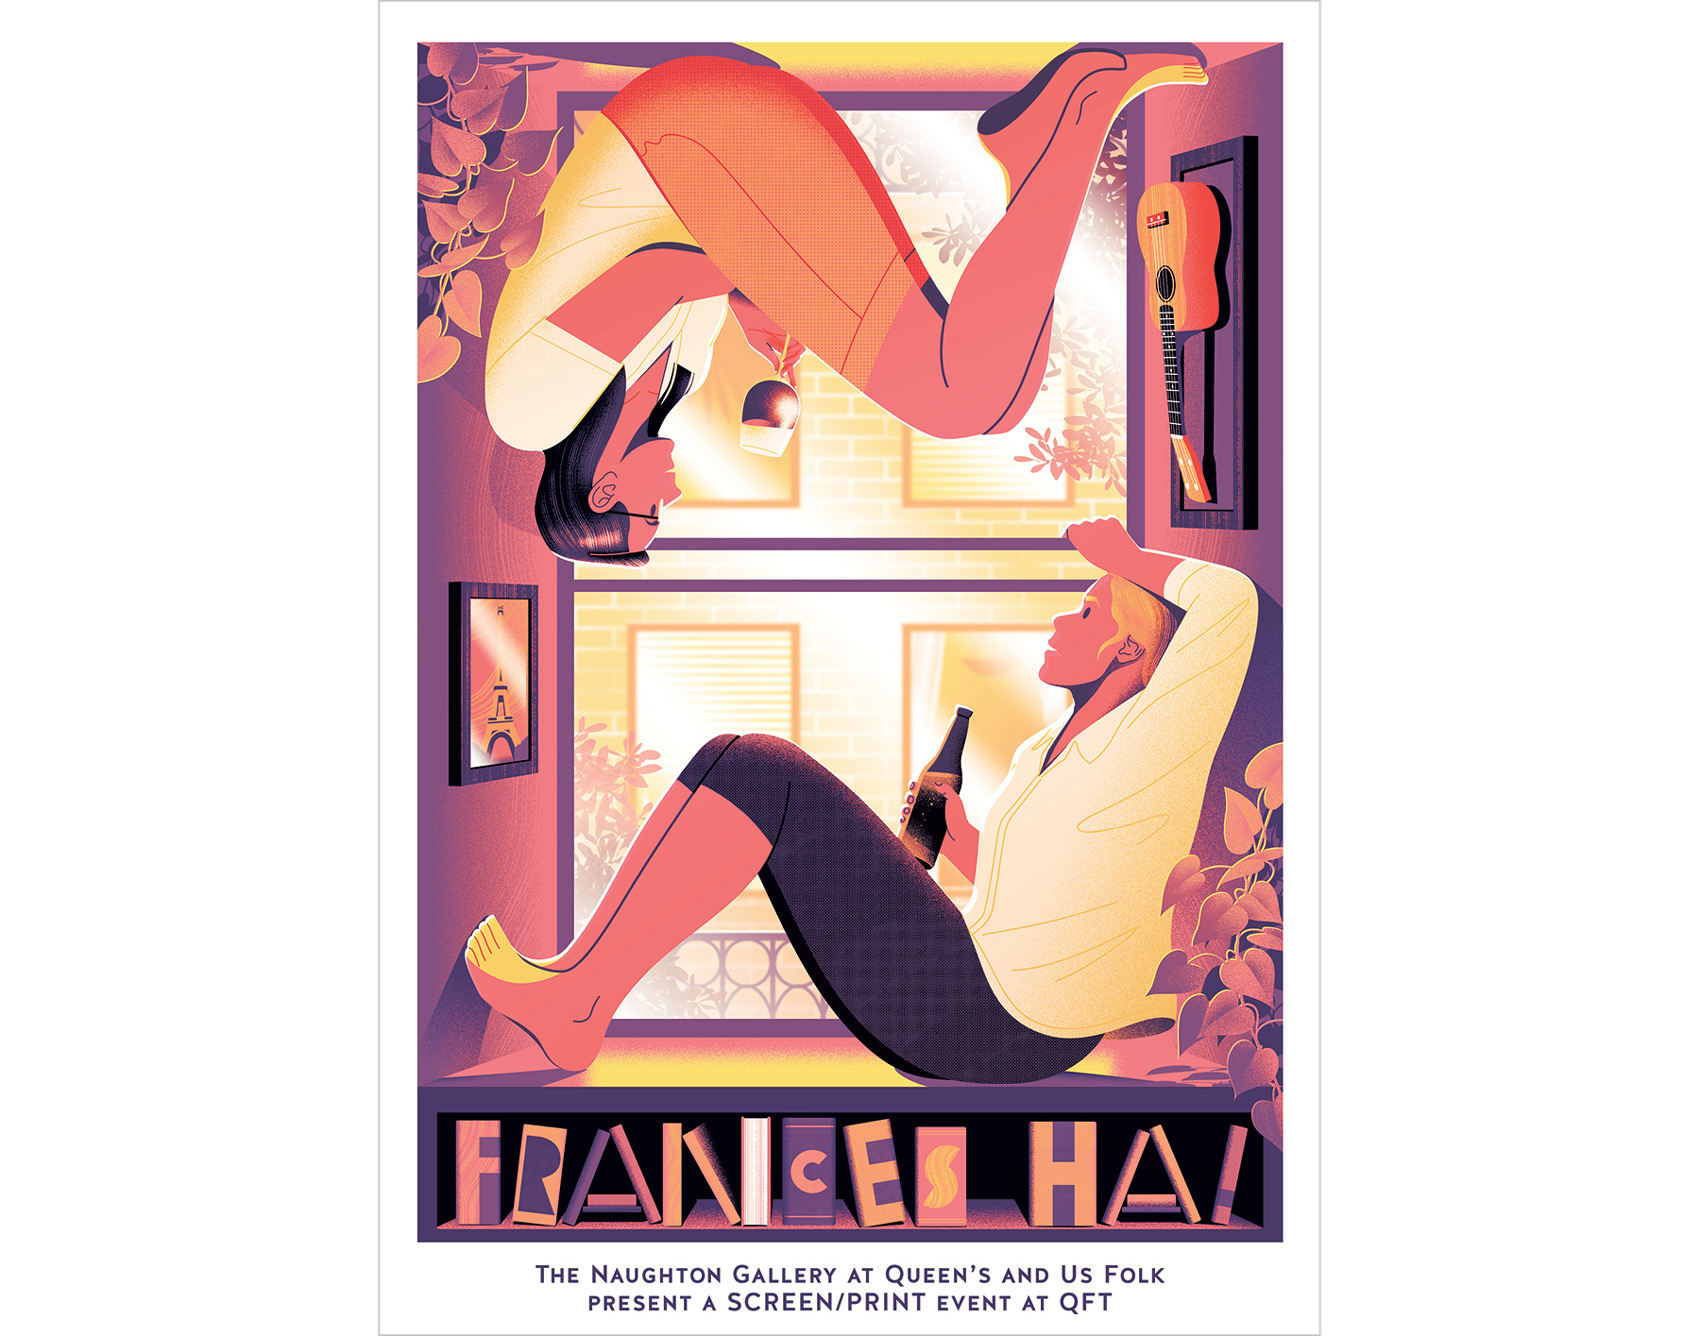 Limited edition screenprinted poster for Naughton Gallery, for a screening of Frances Ha!